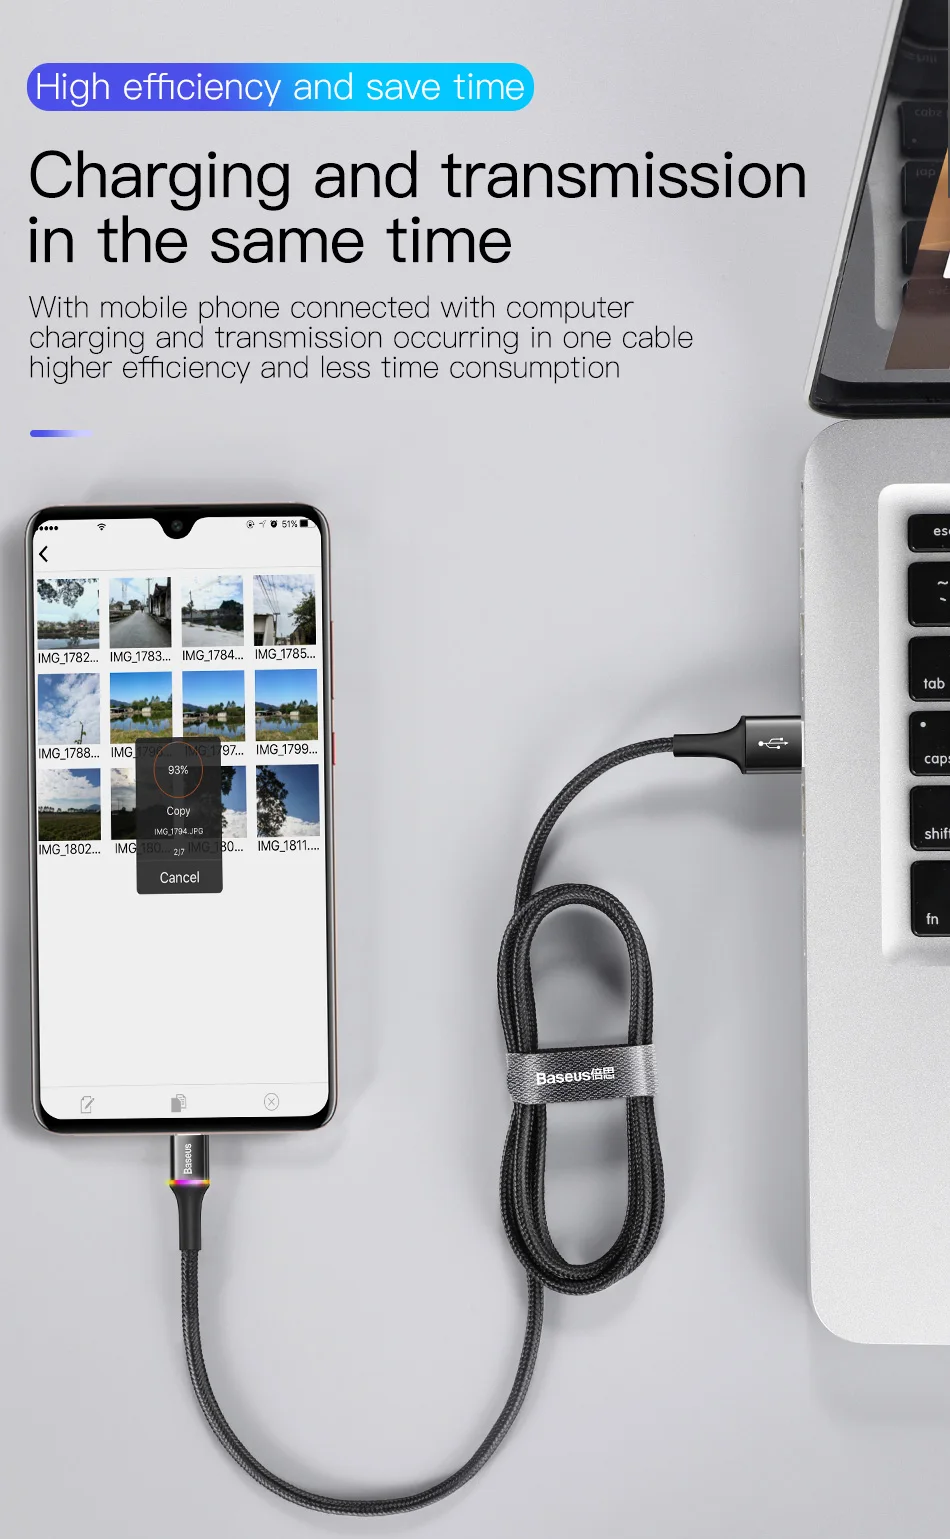 Baseus USB Type C Cable For All Smartphones 1